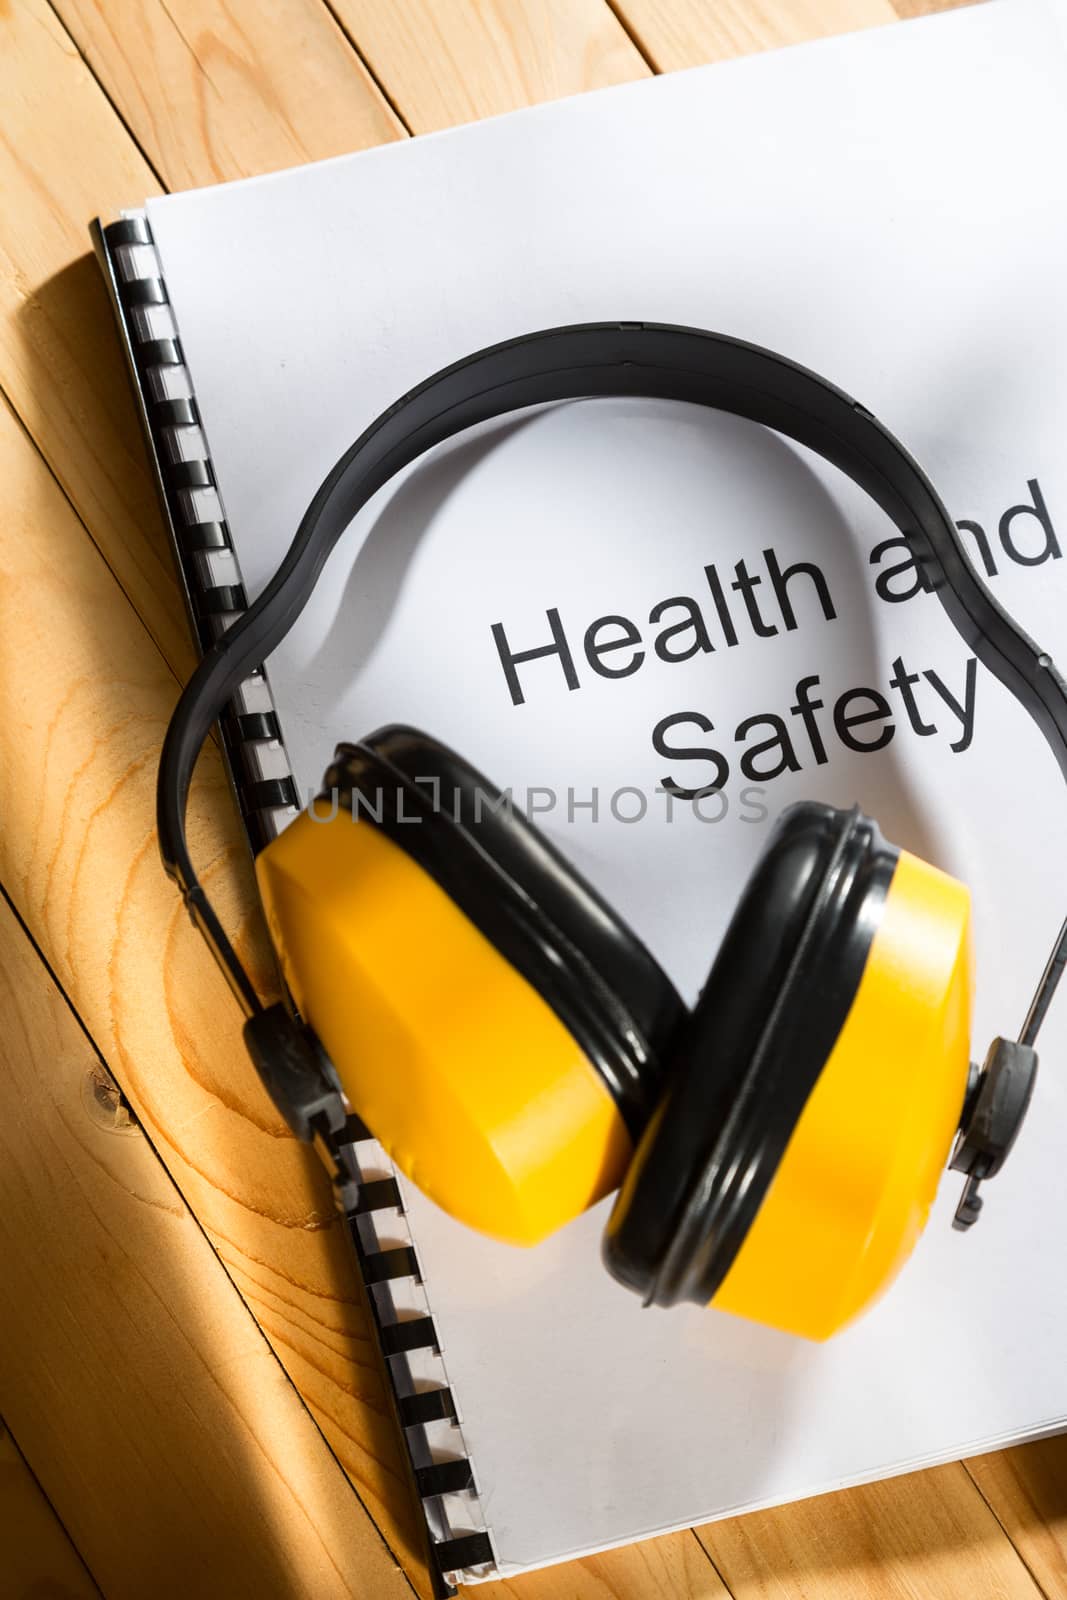 Health and safety register with earphones by Garsya